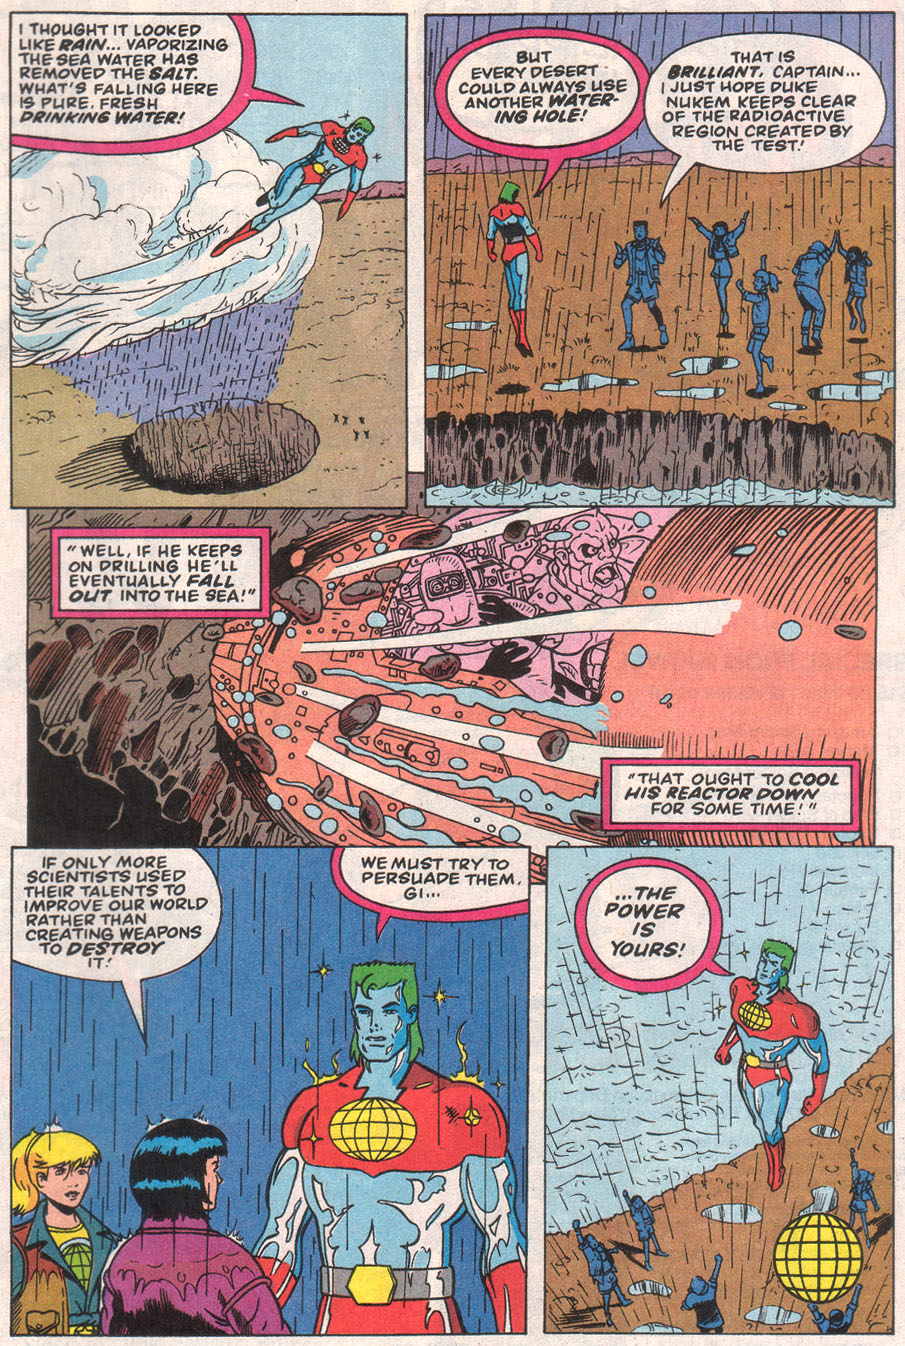 Captain Planet and the Planeteers 11 Page 31